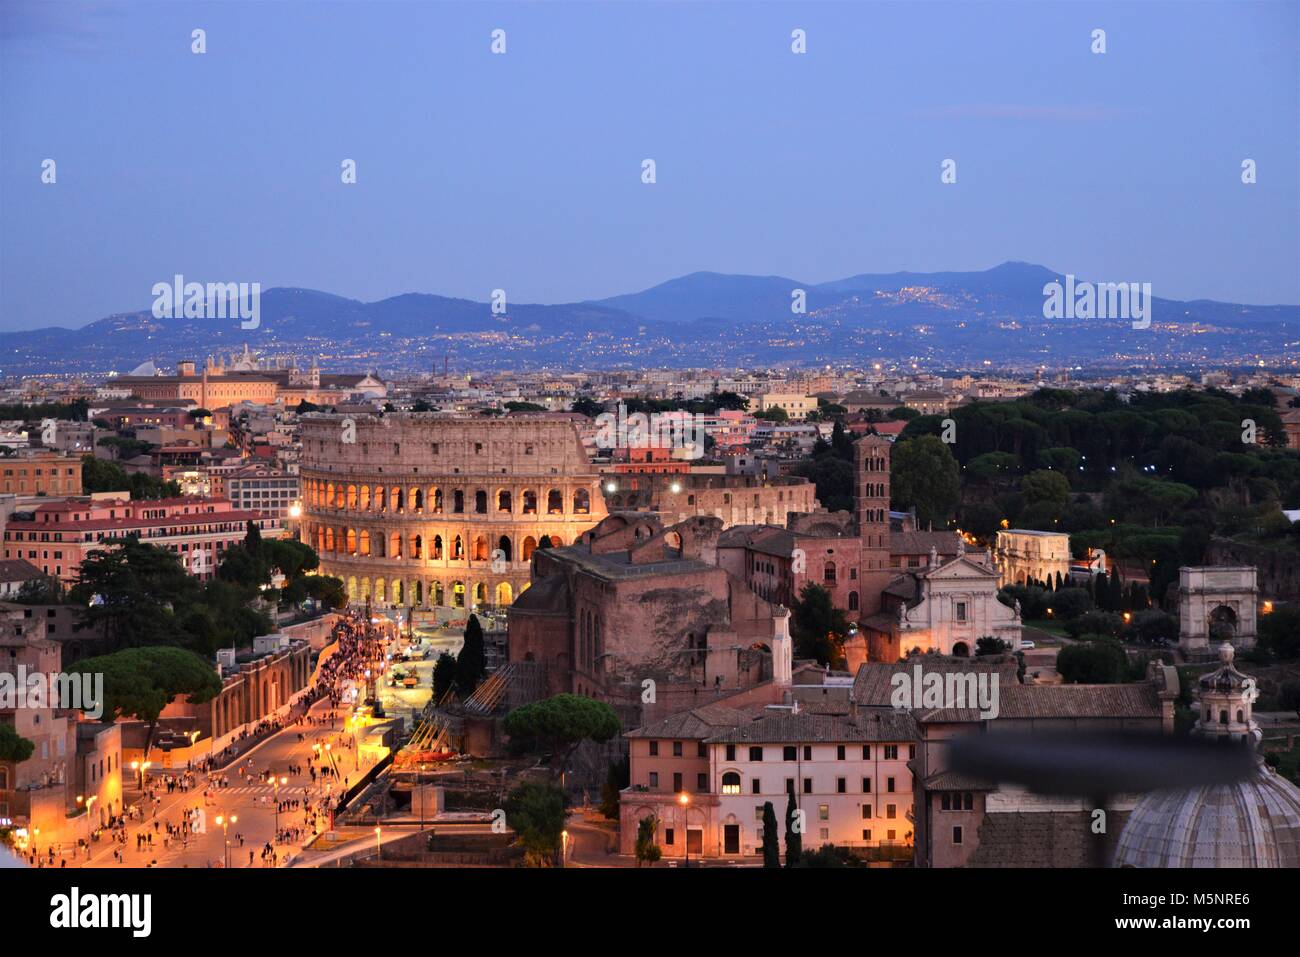 Birdseye View of the Ancient Roman Forum and famous Colosseum, Rome, Italy Stock Photo